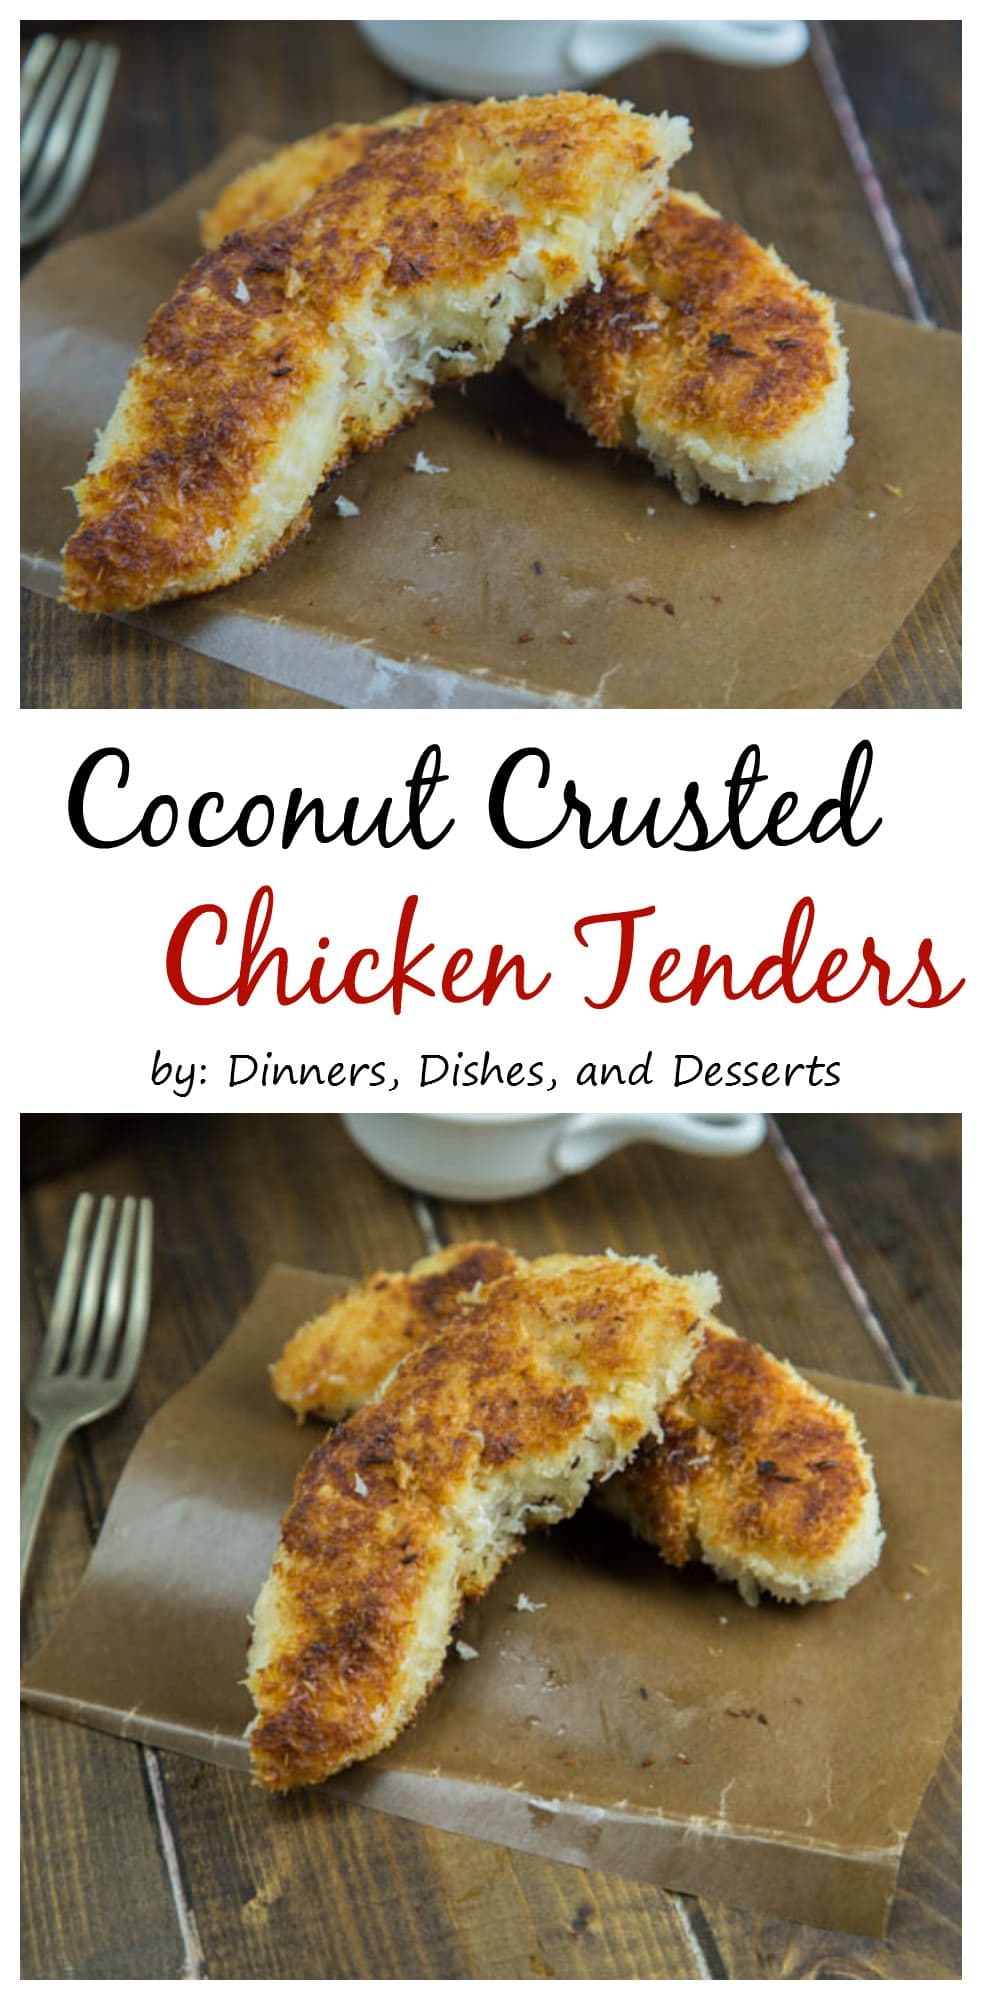 Coconut Crusted Chicken Tenders - super crispy chicken tenders that are coated in shredded coconut! Perfect for a quick dinner for the whole family!